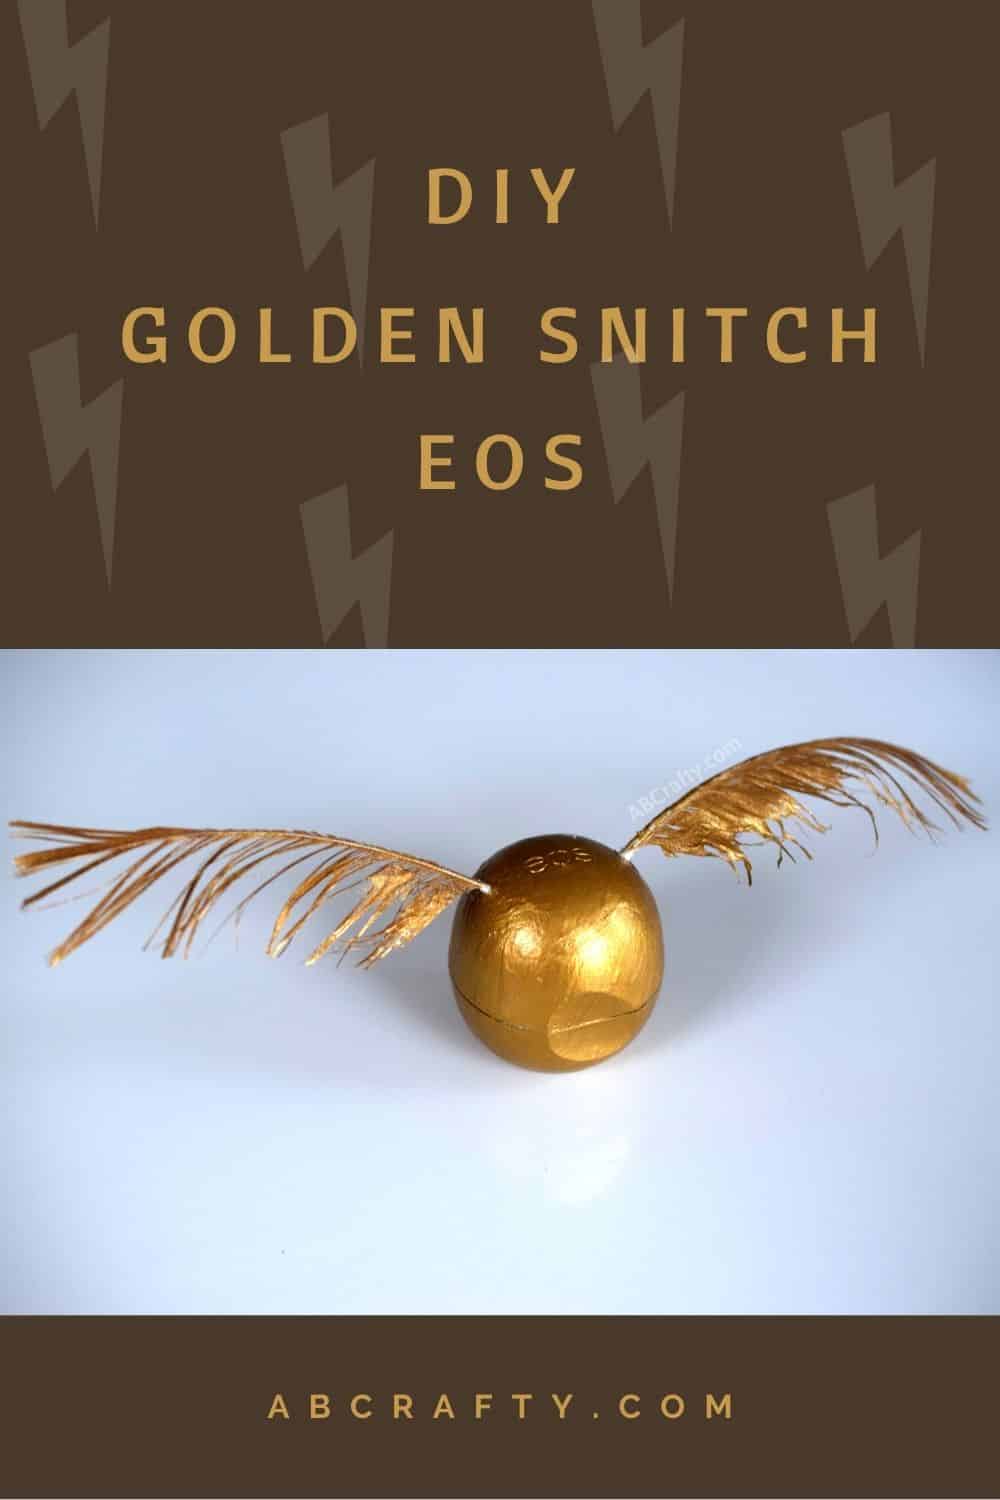 Handmade Harry Potter craft that looks like the golden snitch from quidditch at Hogwarts. It's made of an eos and feathers and painted with gold paint. The background has lightening bolts that represent Harry's scare. The title reads "DIY golden snitch eos" and has abcrafty.com at the bottom